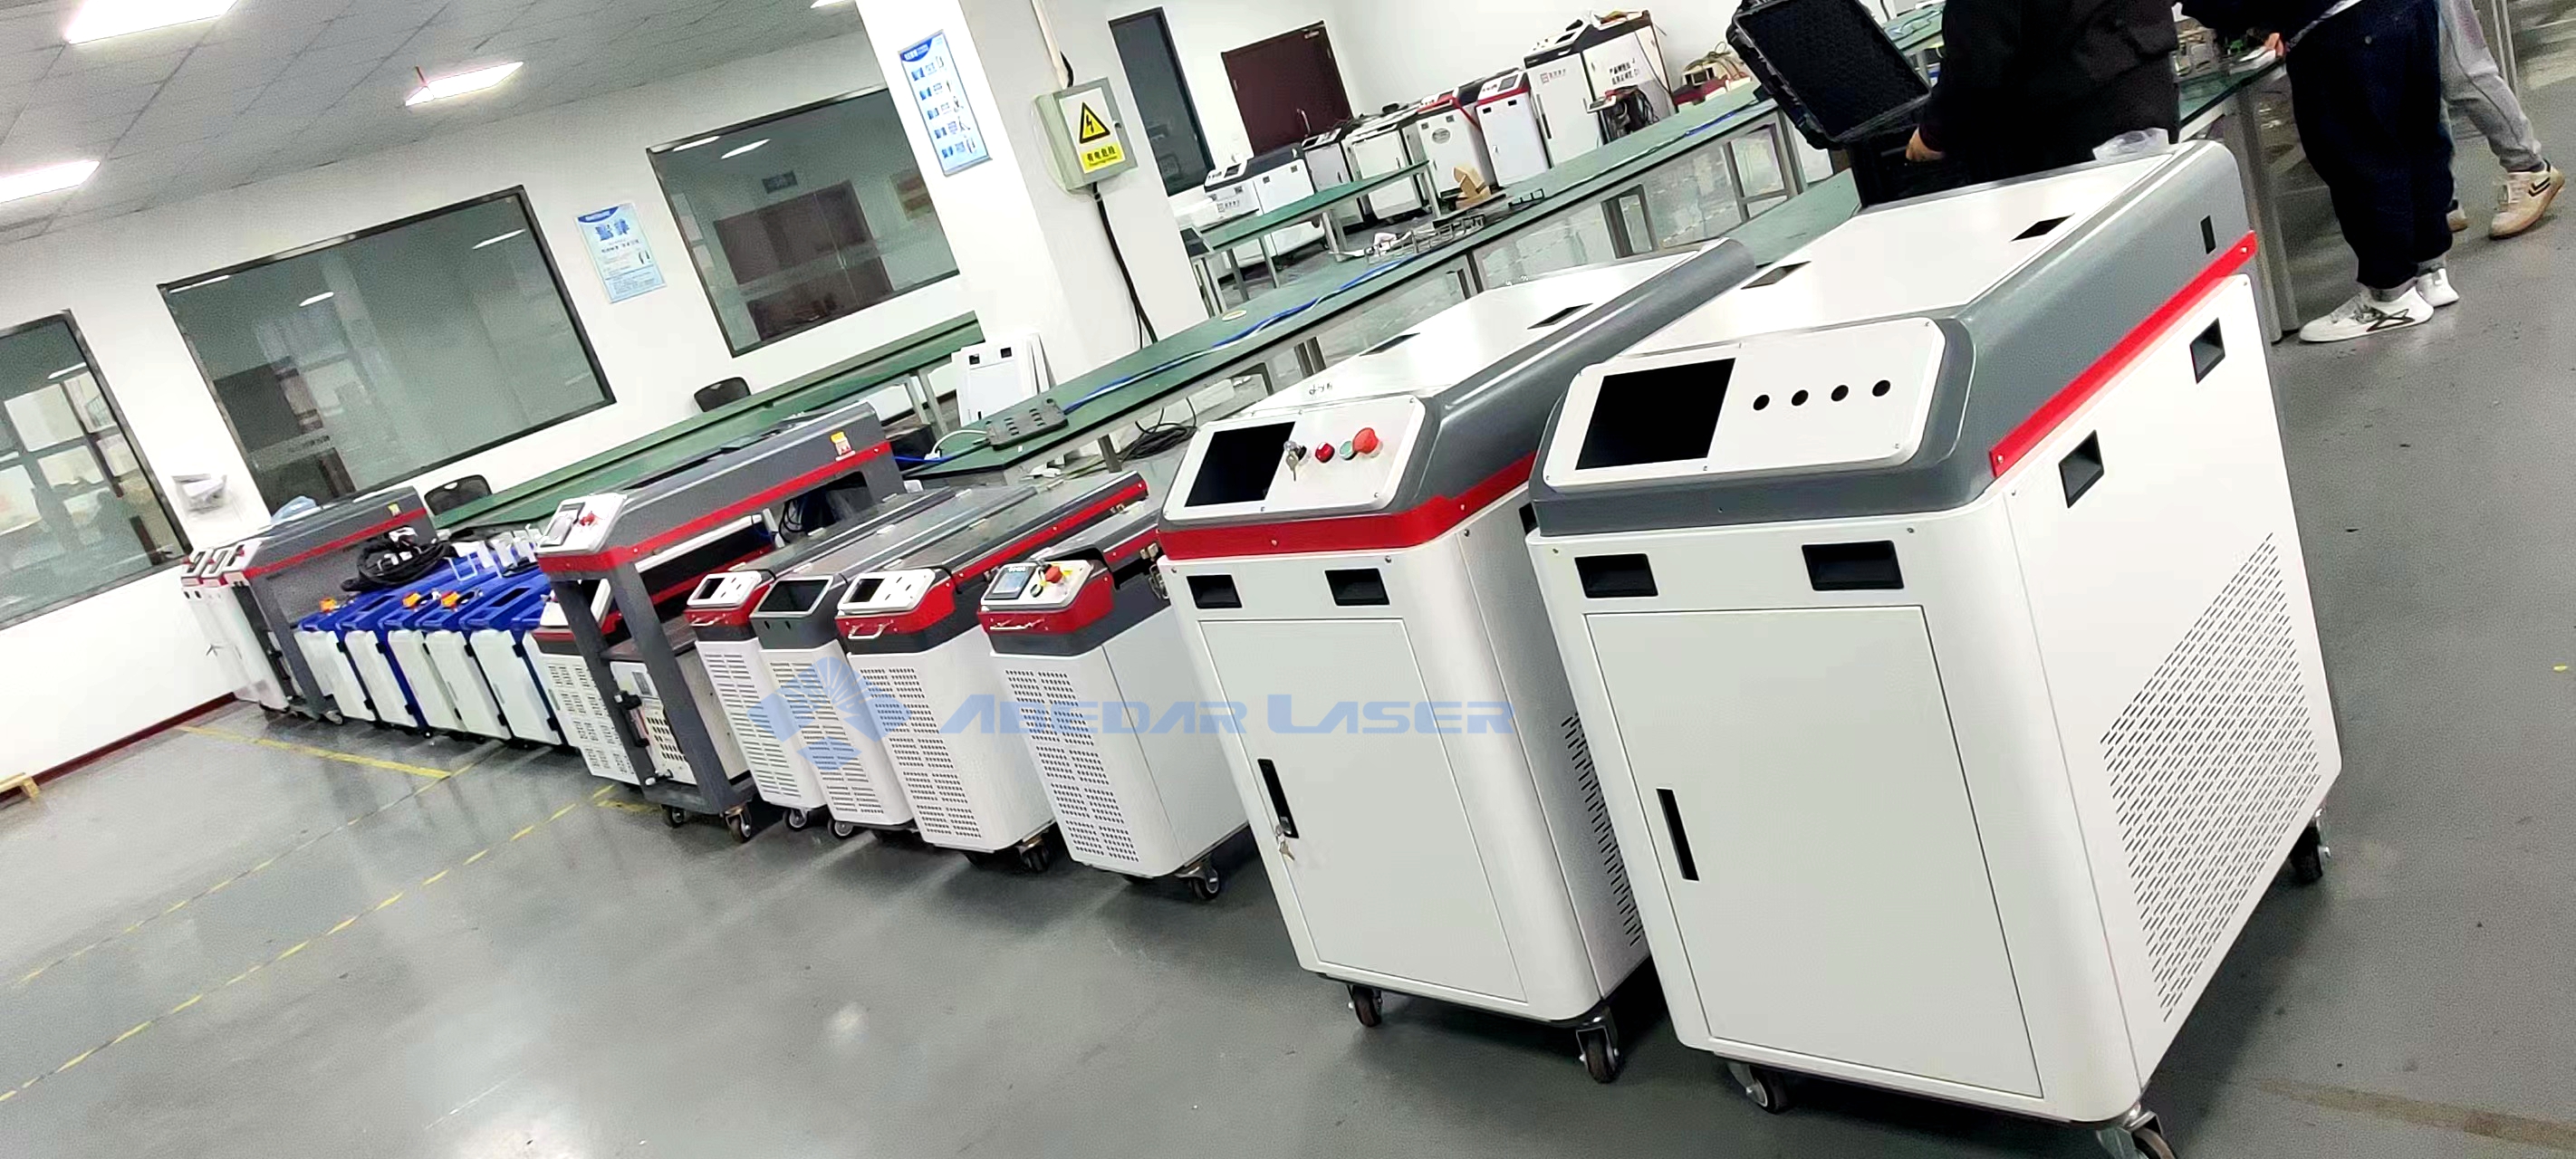 Rust Laser Cleaning Machine Factory_副本